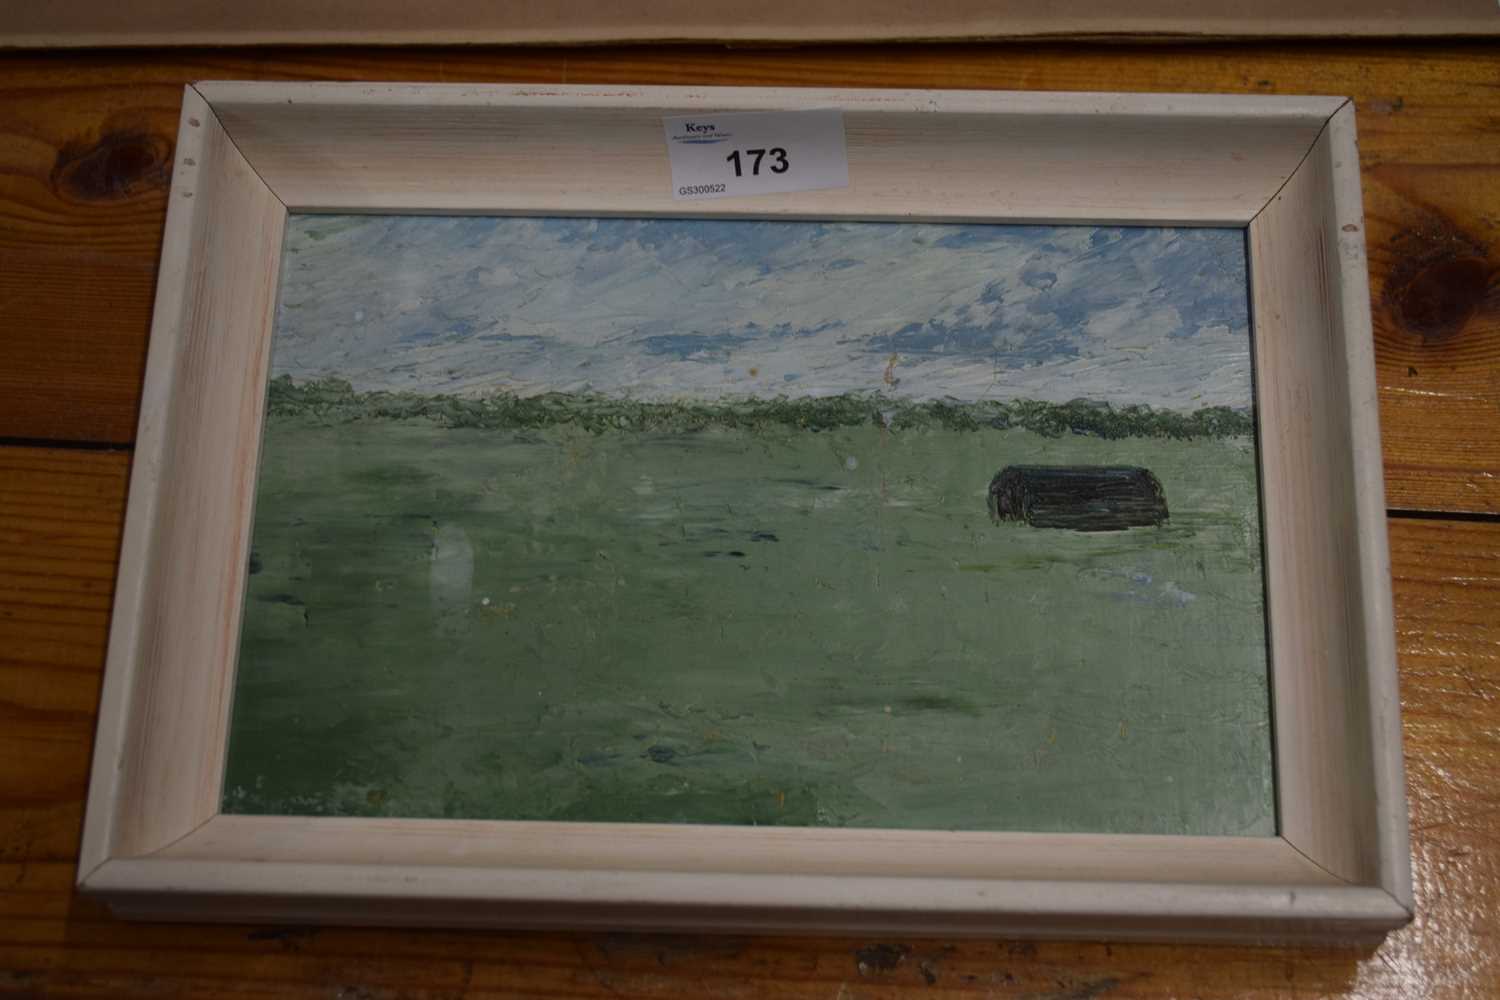 CONTEMPORARY SCHOOL, ABSTRACT STUDY, PASTORAL SCENE WITH BUILDING, OIL ON BOARD, UNSIGNED